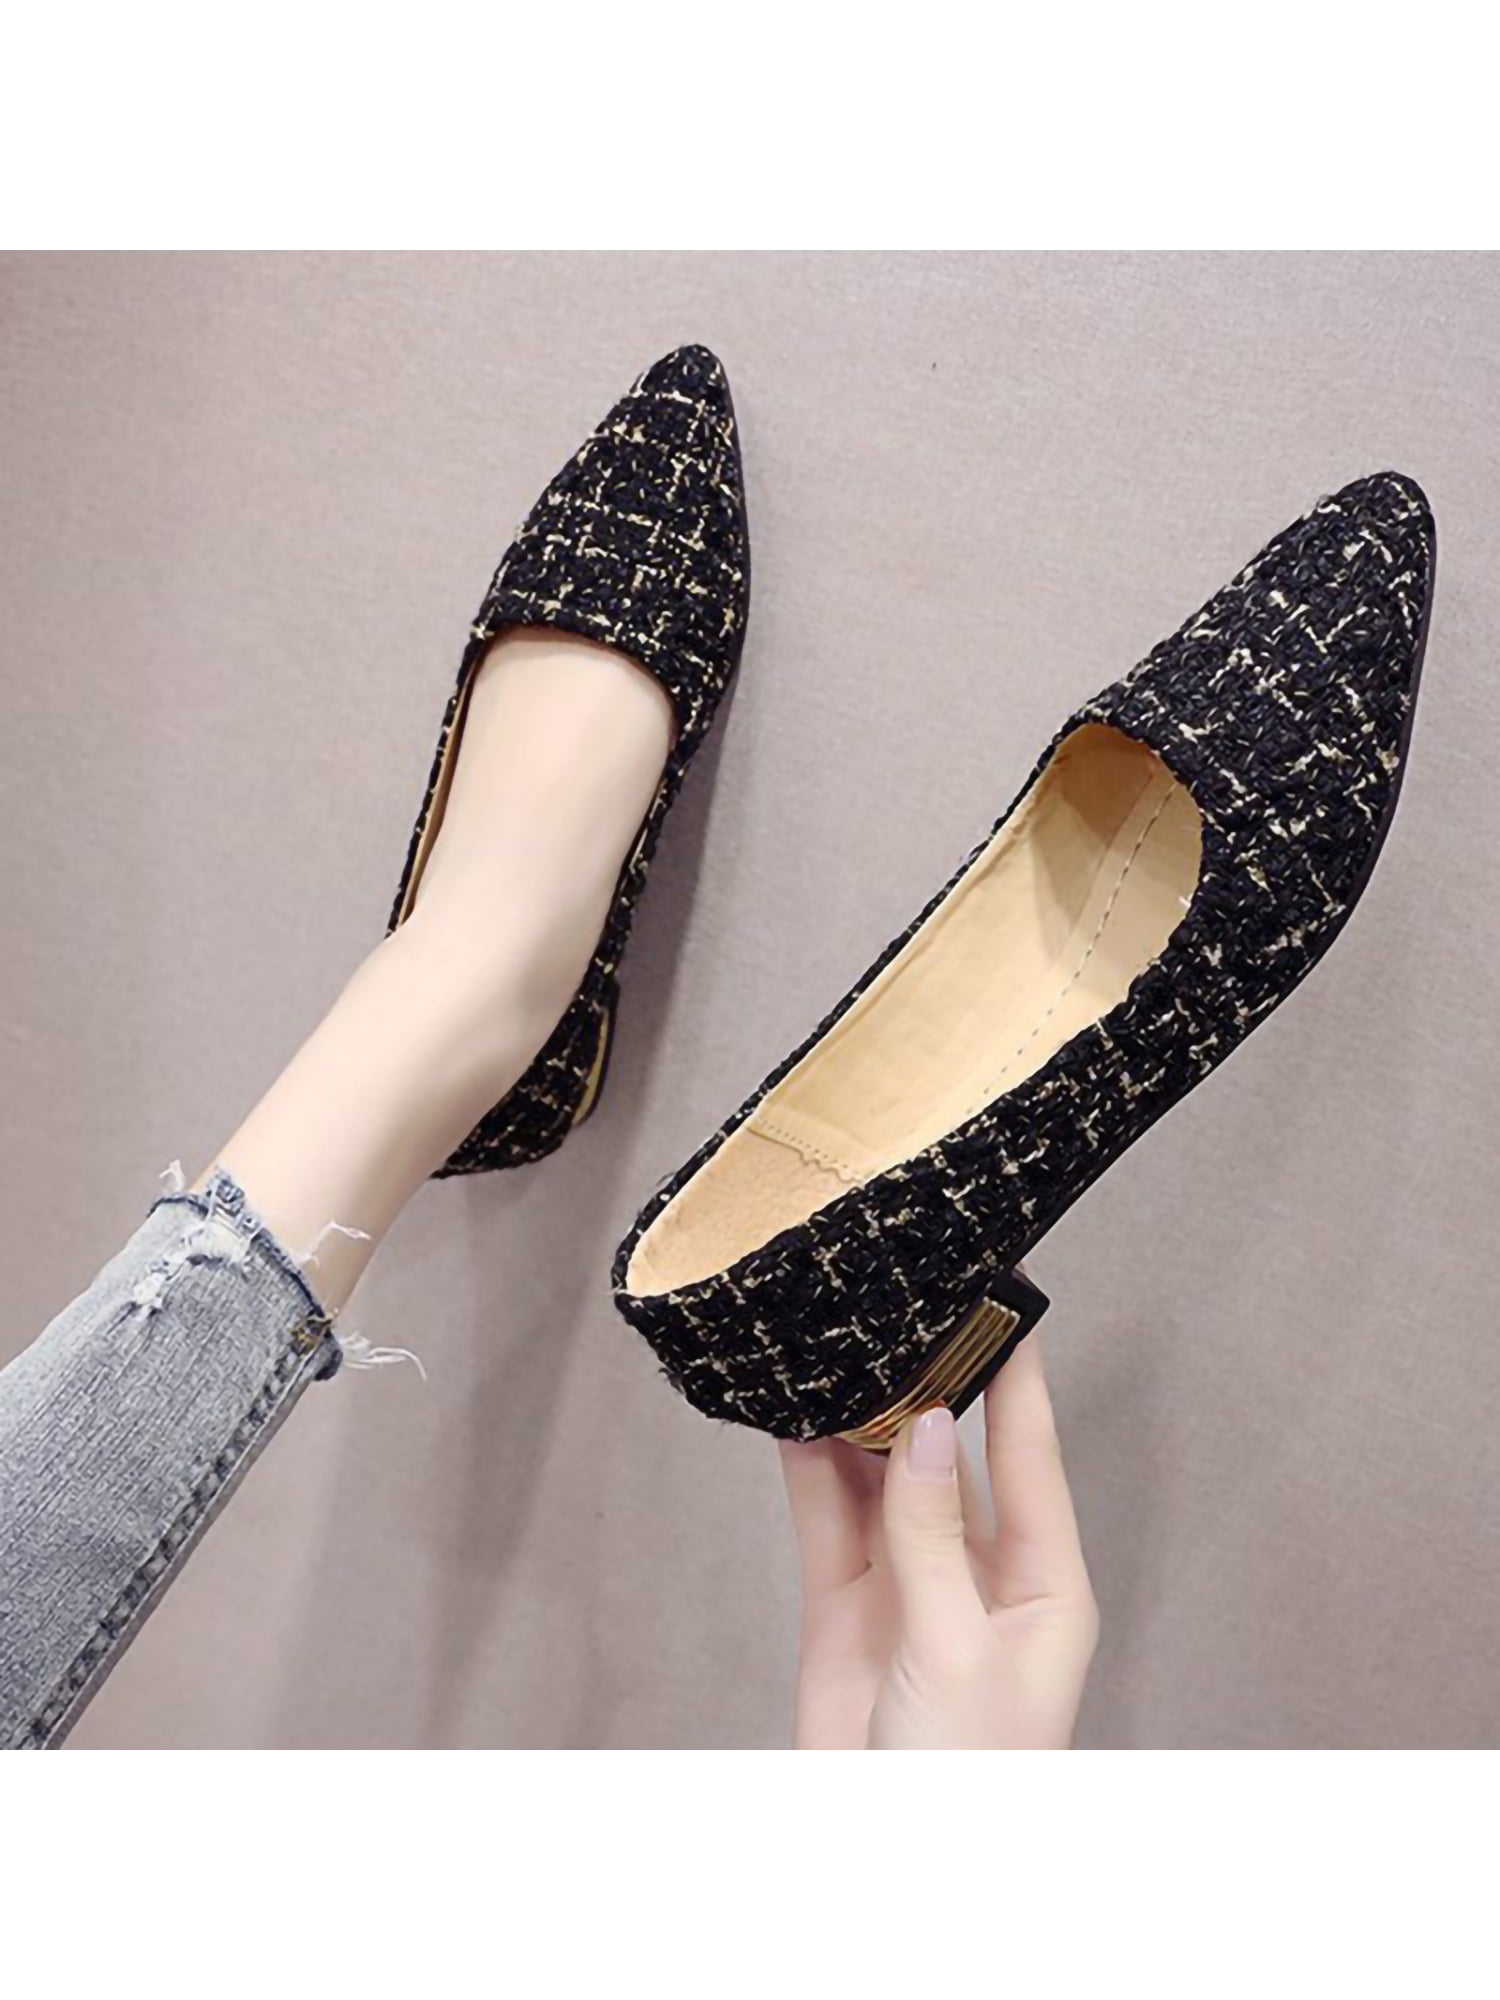 Women Boat Shoes Pointed Toe Casual Ballet Slip On Flats Loafers Ballerina Shoes